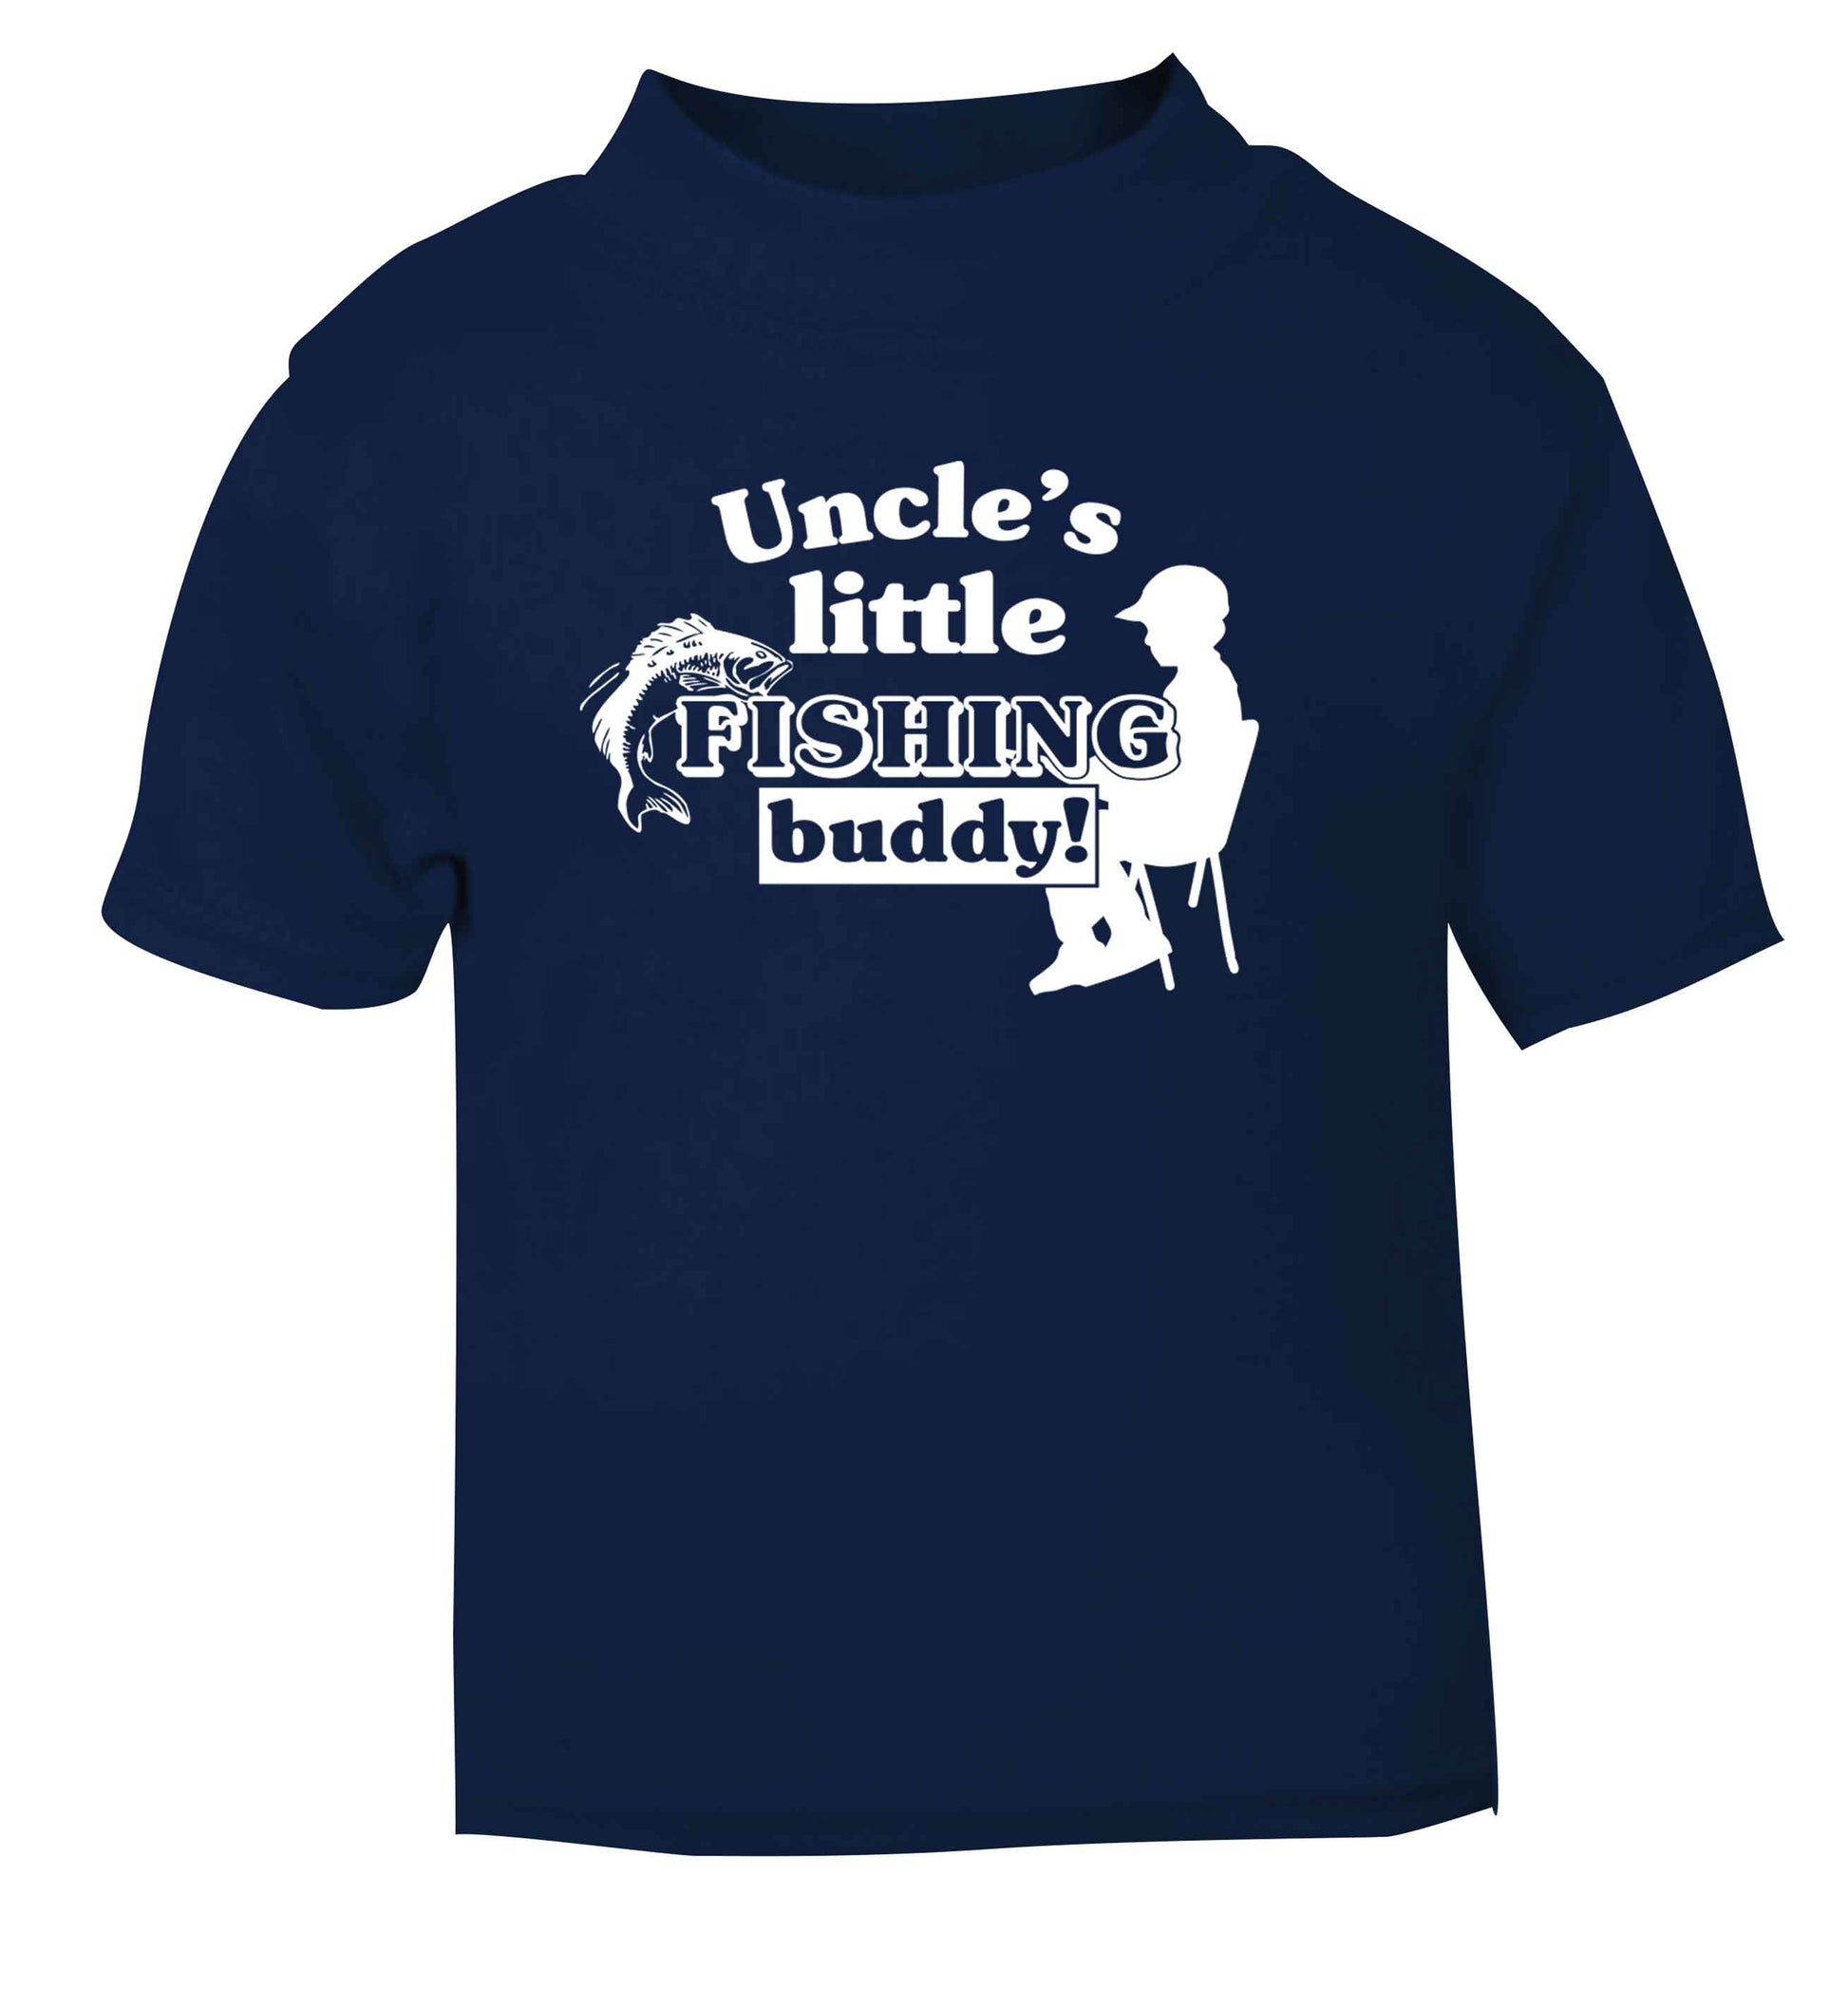 Uncle's little fishing buddy navy Baby Toddler Tshirt 2 Years